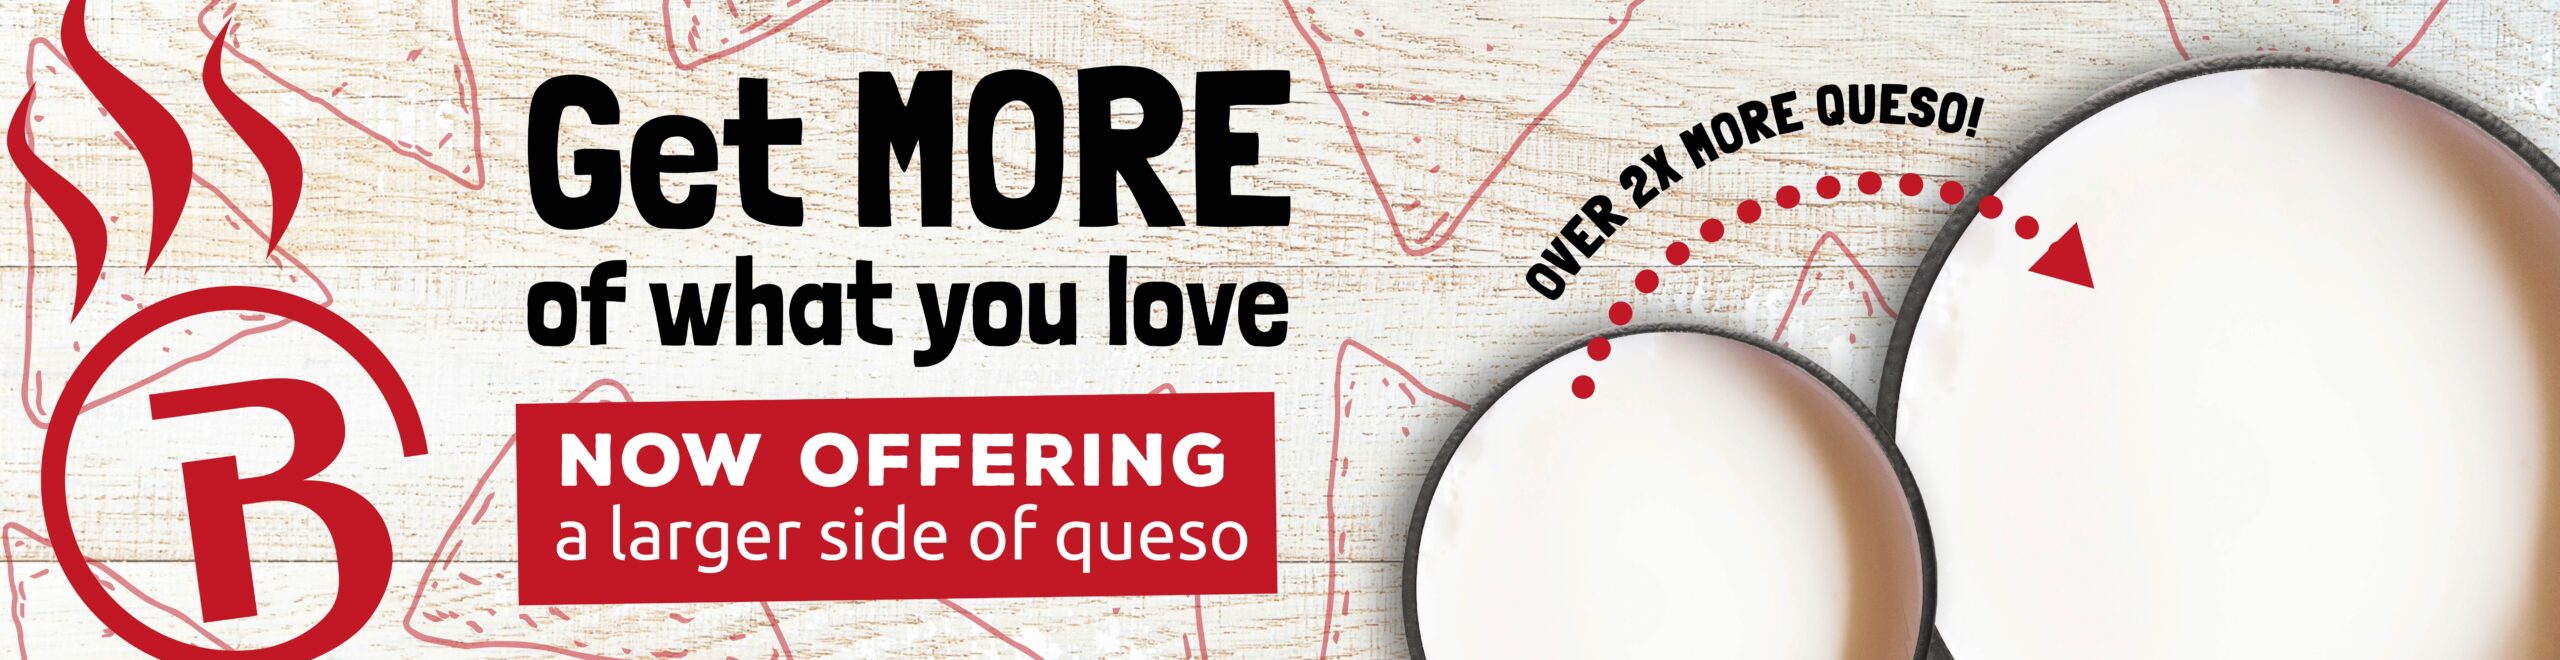 Larger Queso Side option is now available at Burrachos